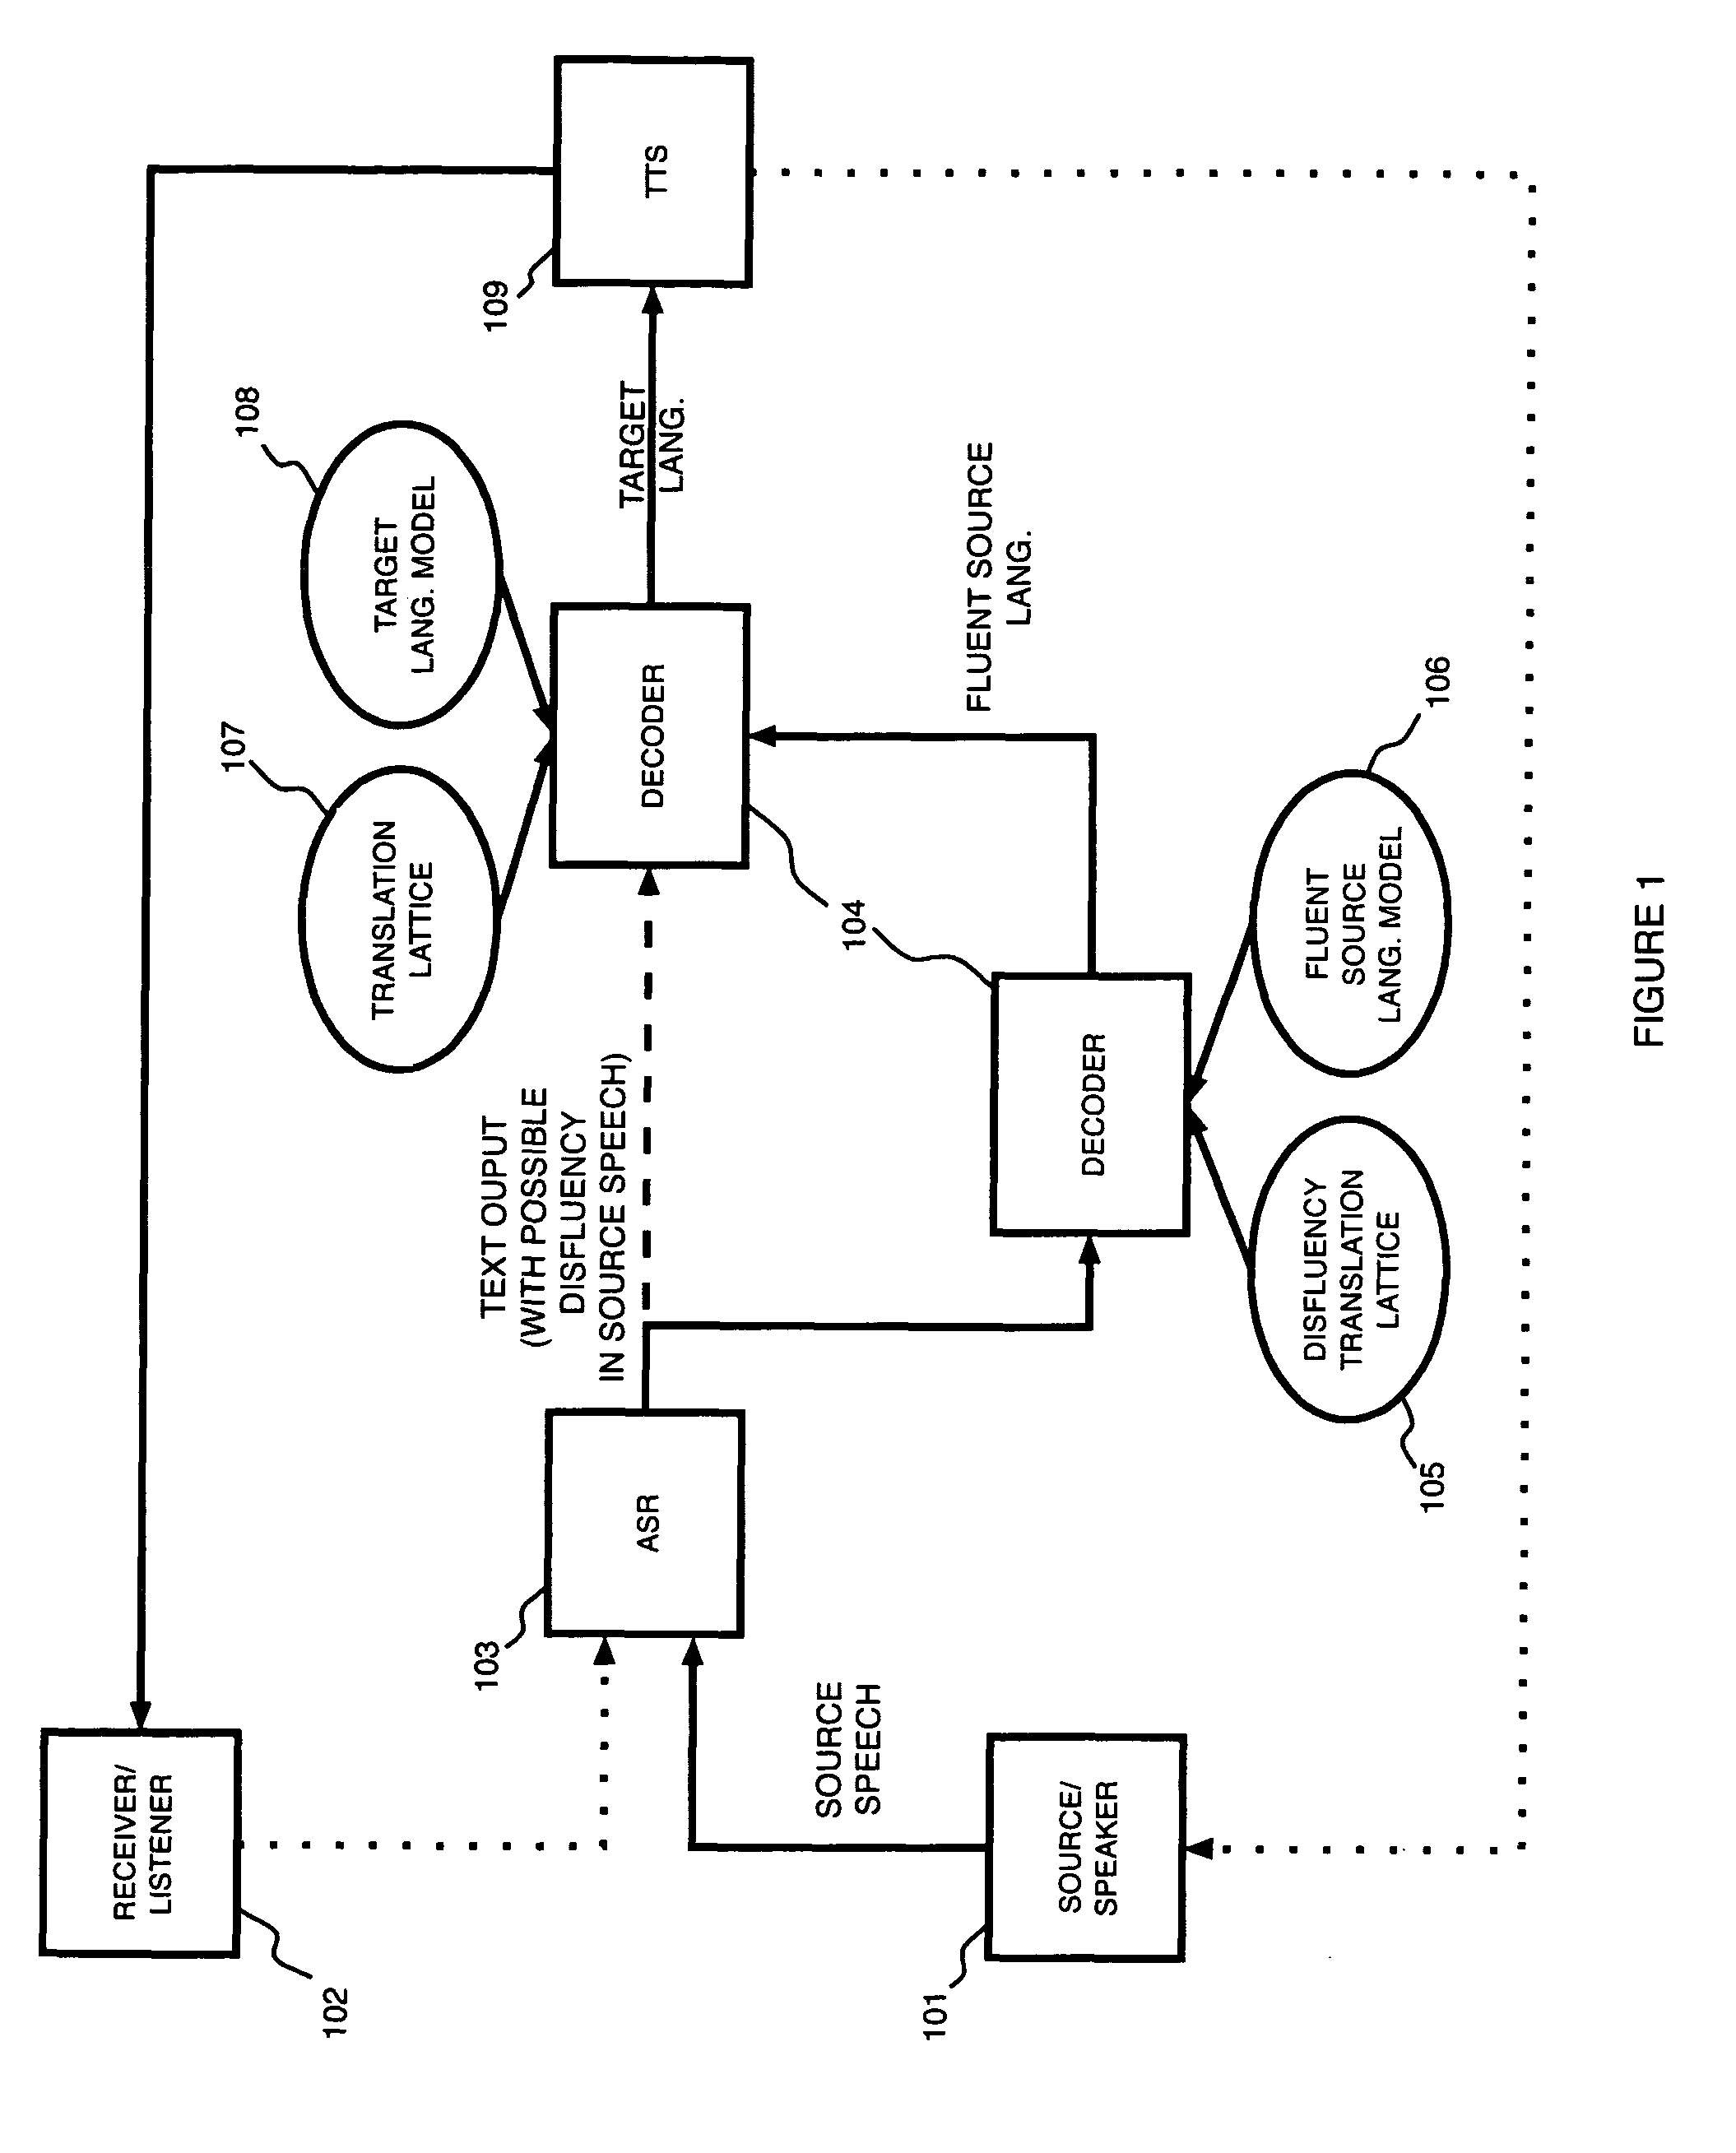 Disfluency detection for a speech-to-speech translation system using phrase-level machine translation with weighted finite state transducers